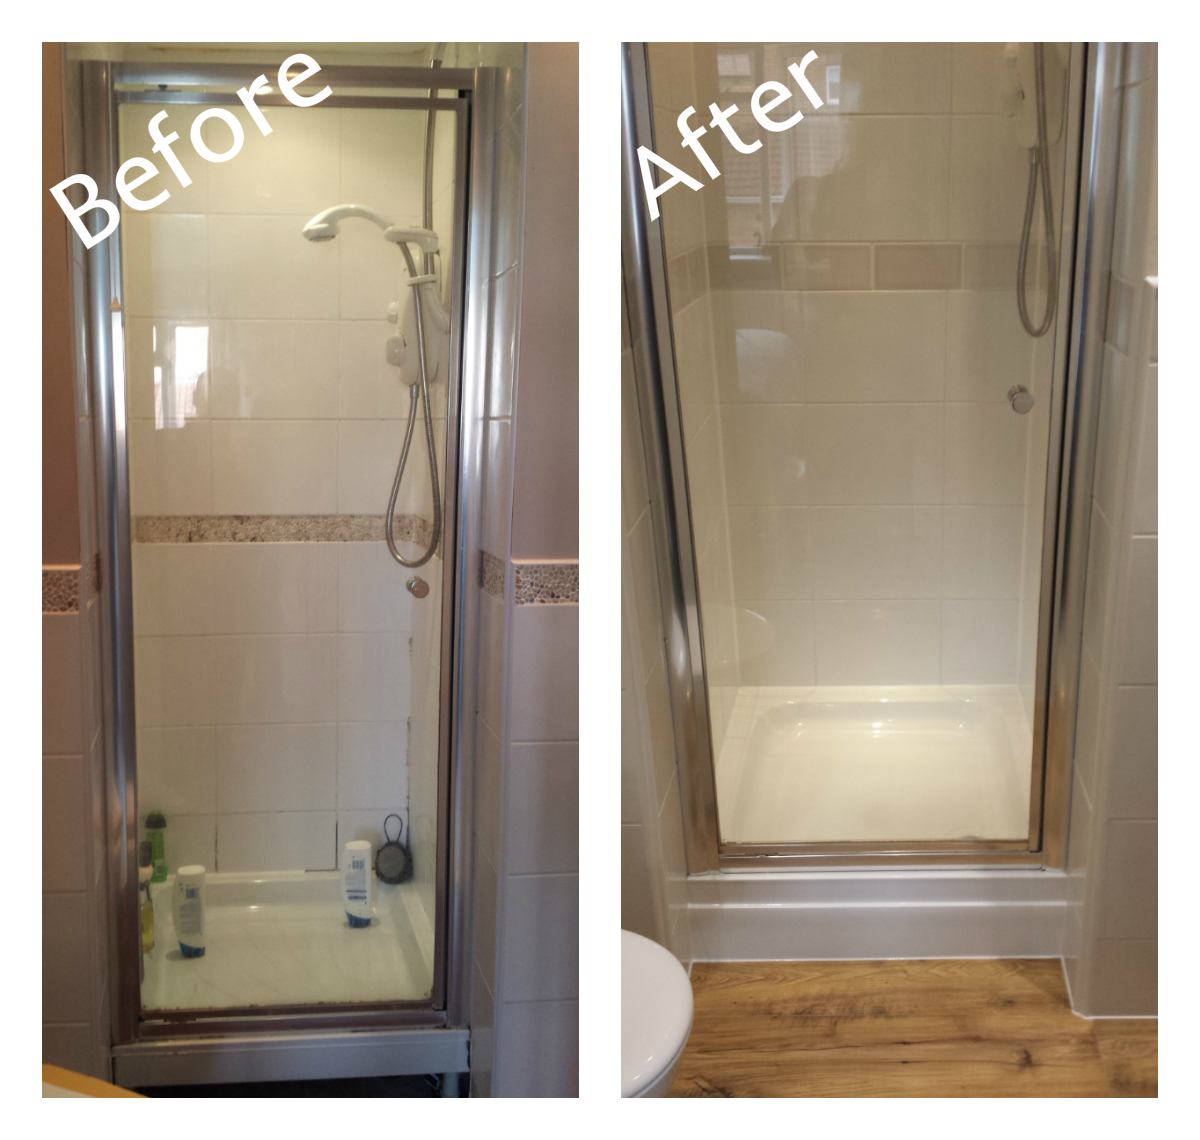 Before & after photos of ensuite refurbishment